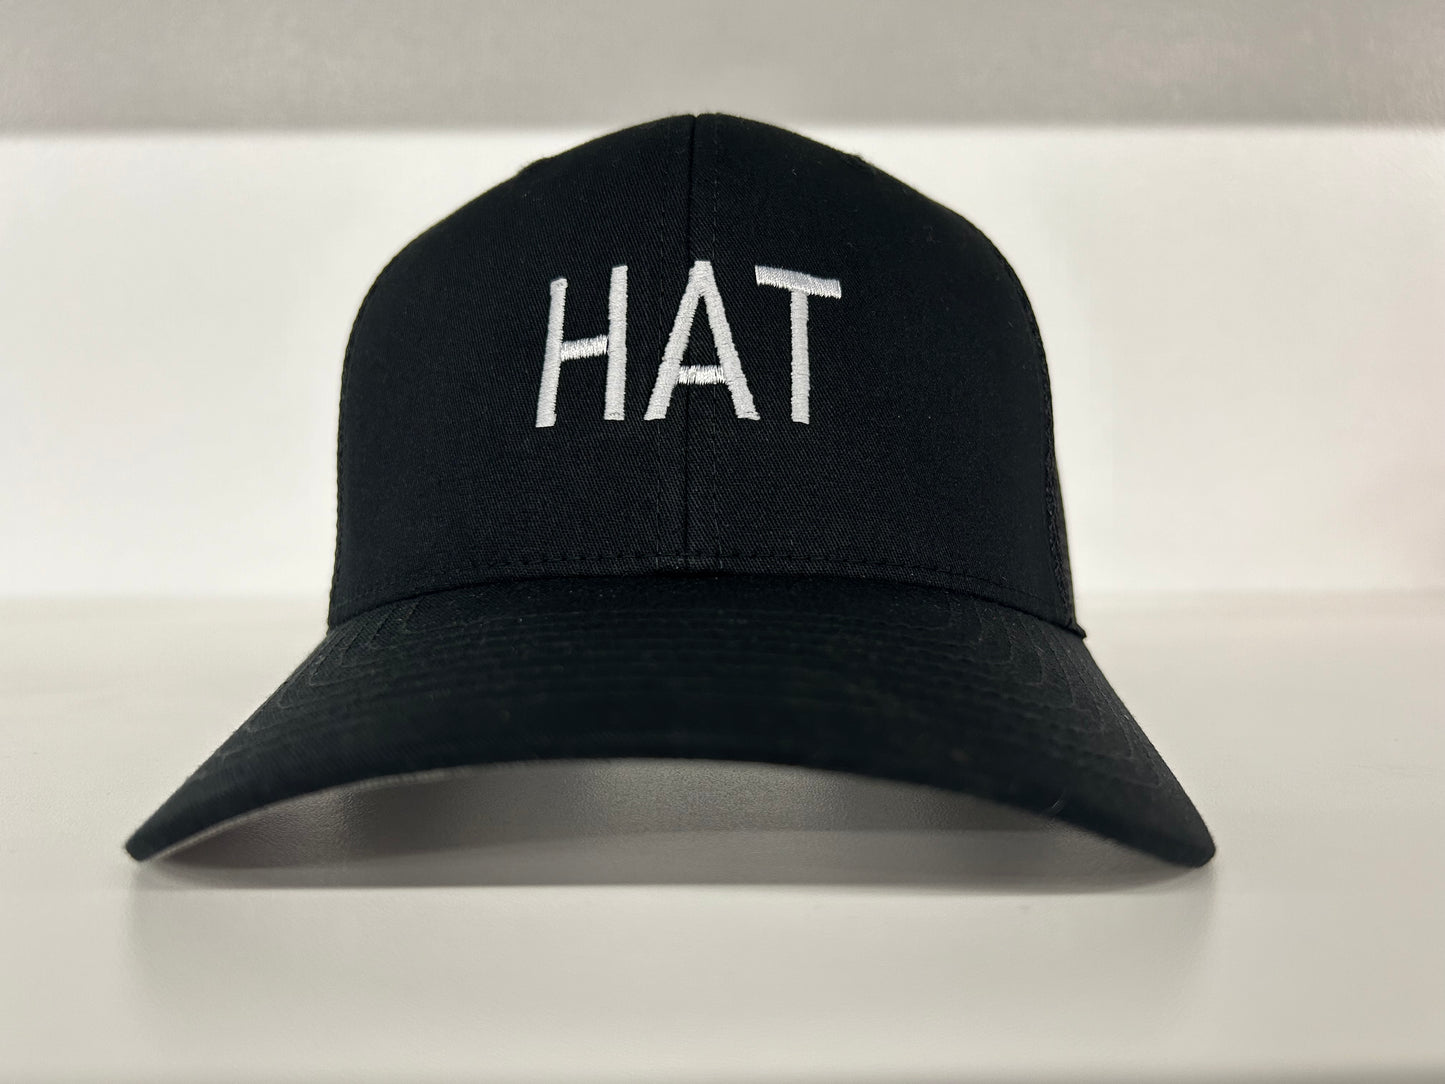 The HAT HAT